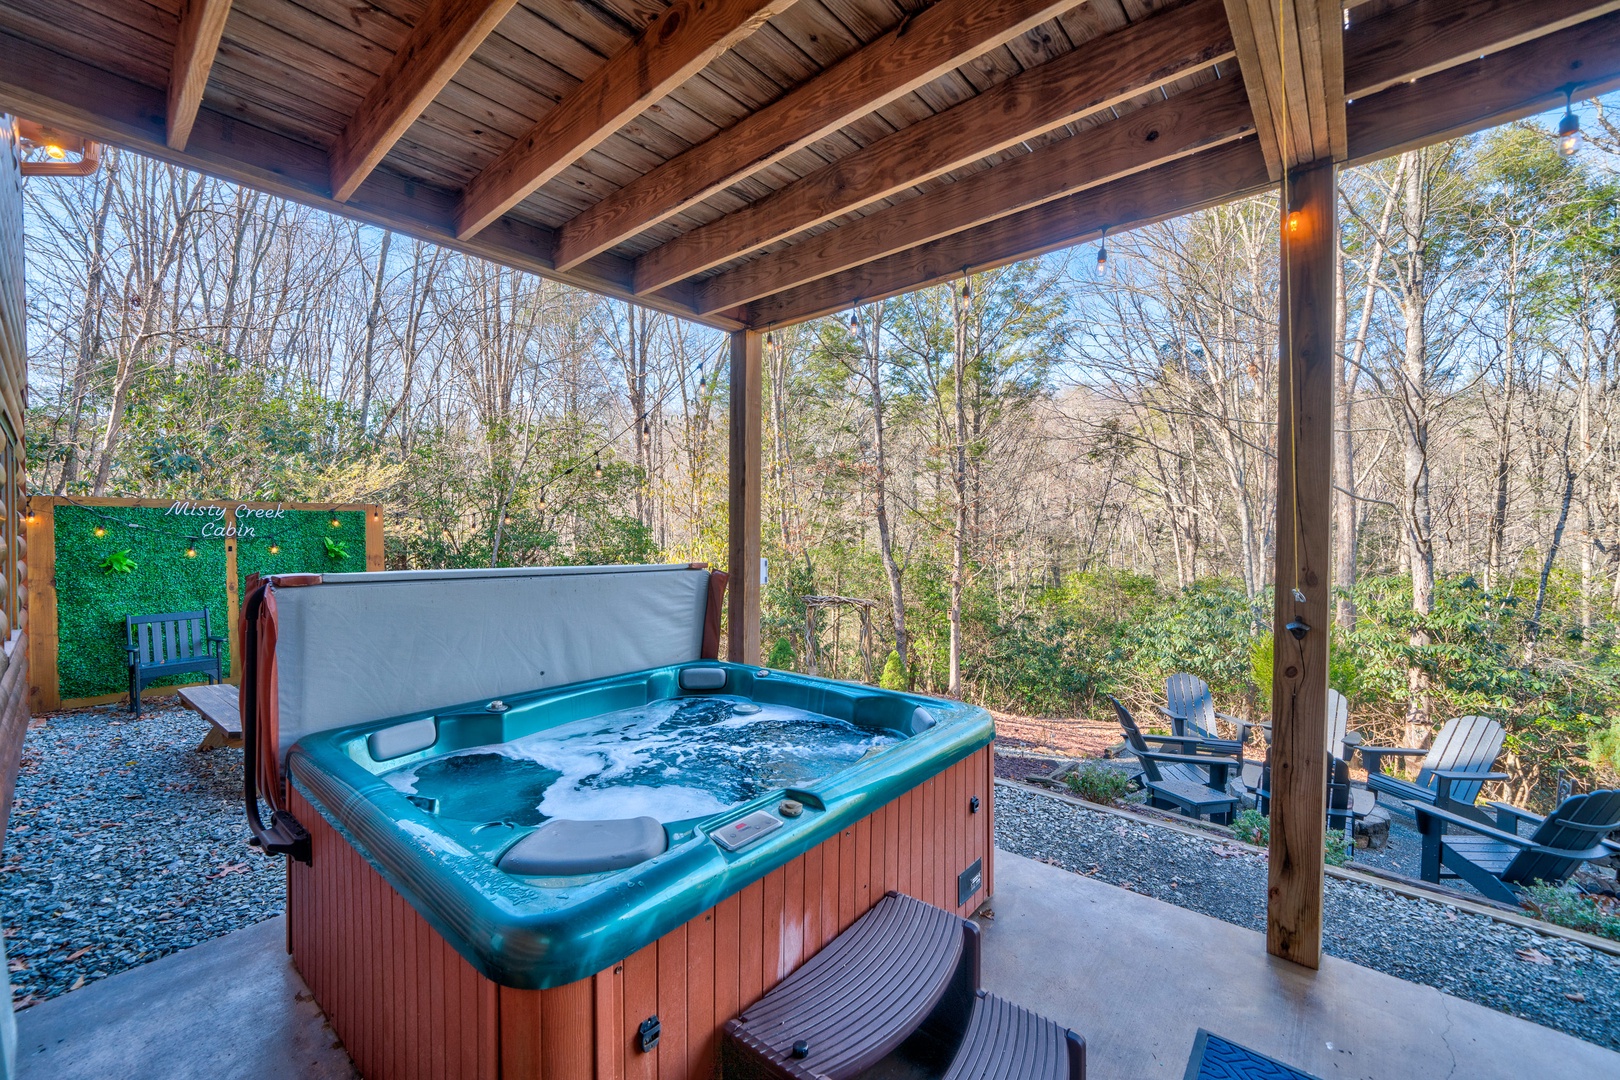 Indulge in the exclusive relaxation of the private hot tub